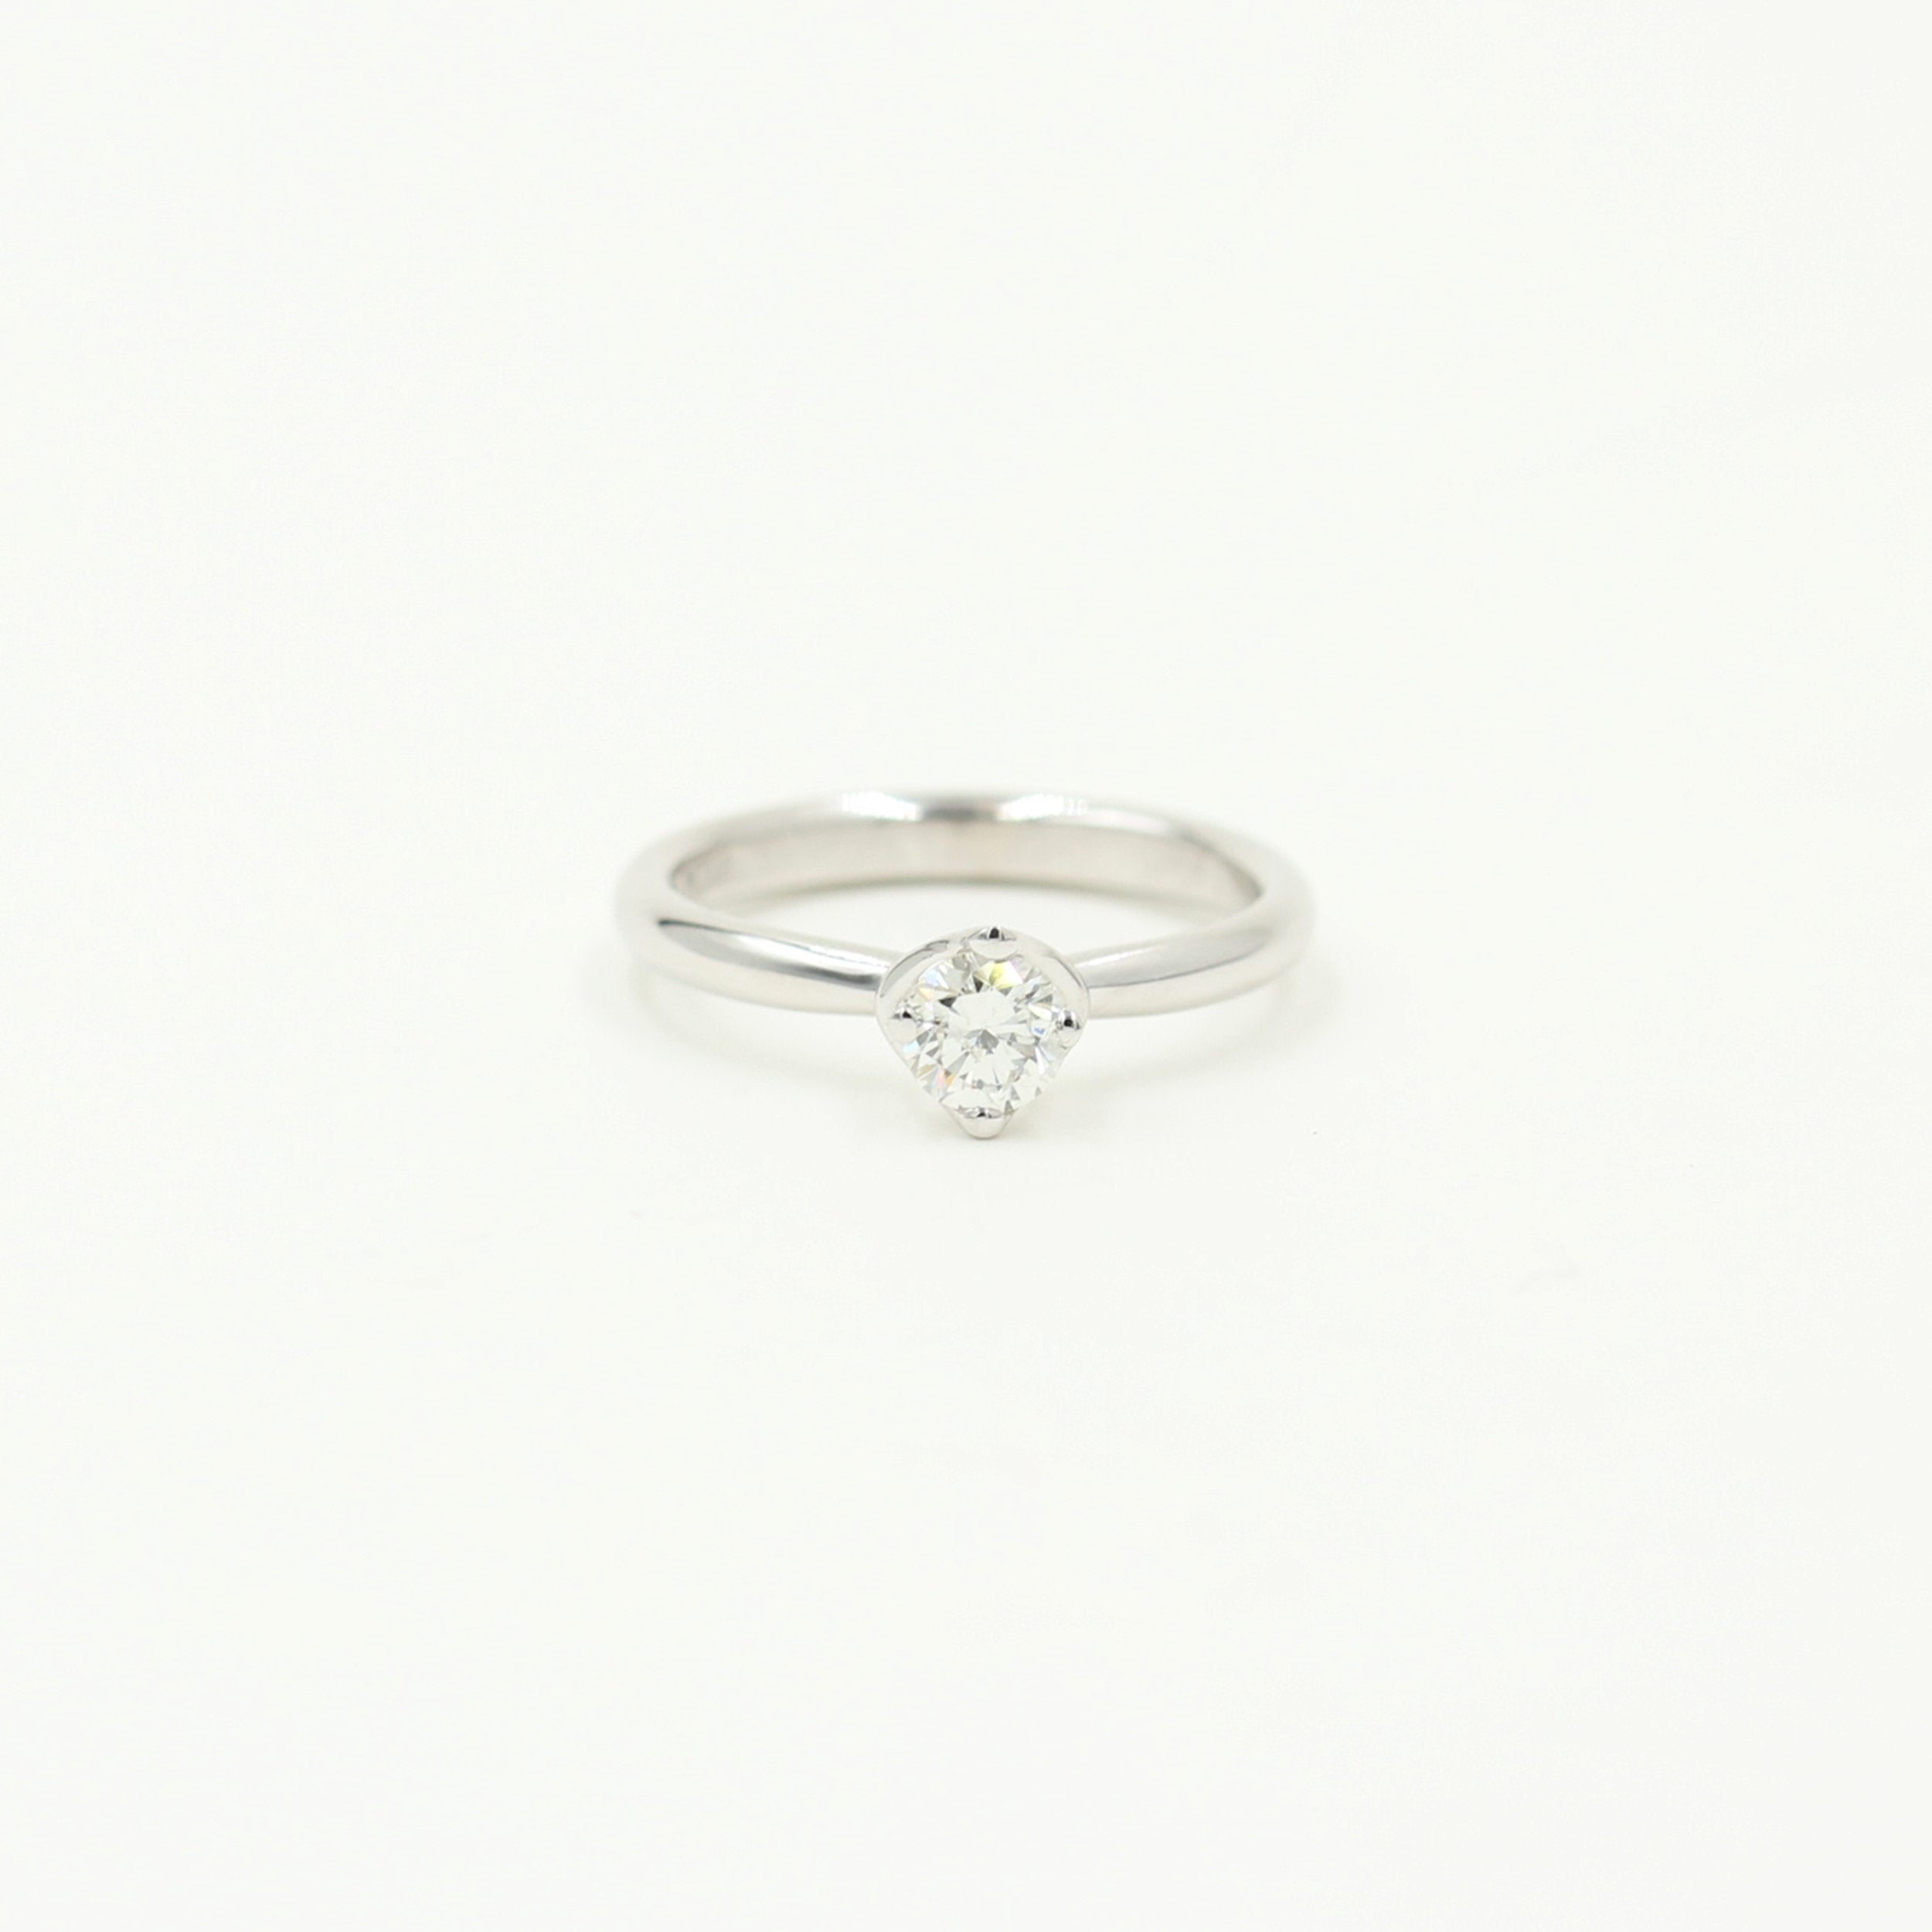 Solitairering med 0,47 ct. G.SI2 brillant